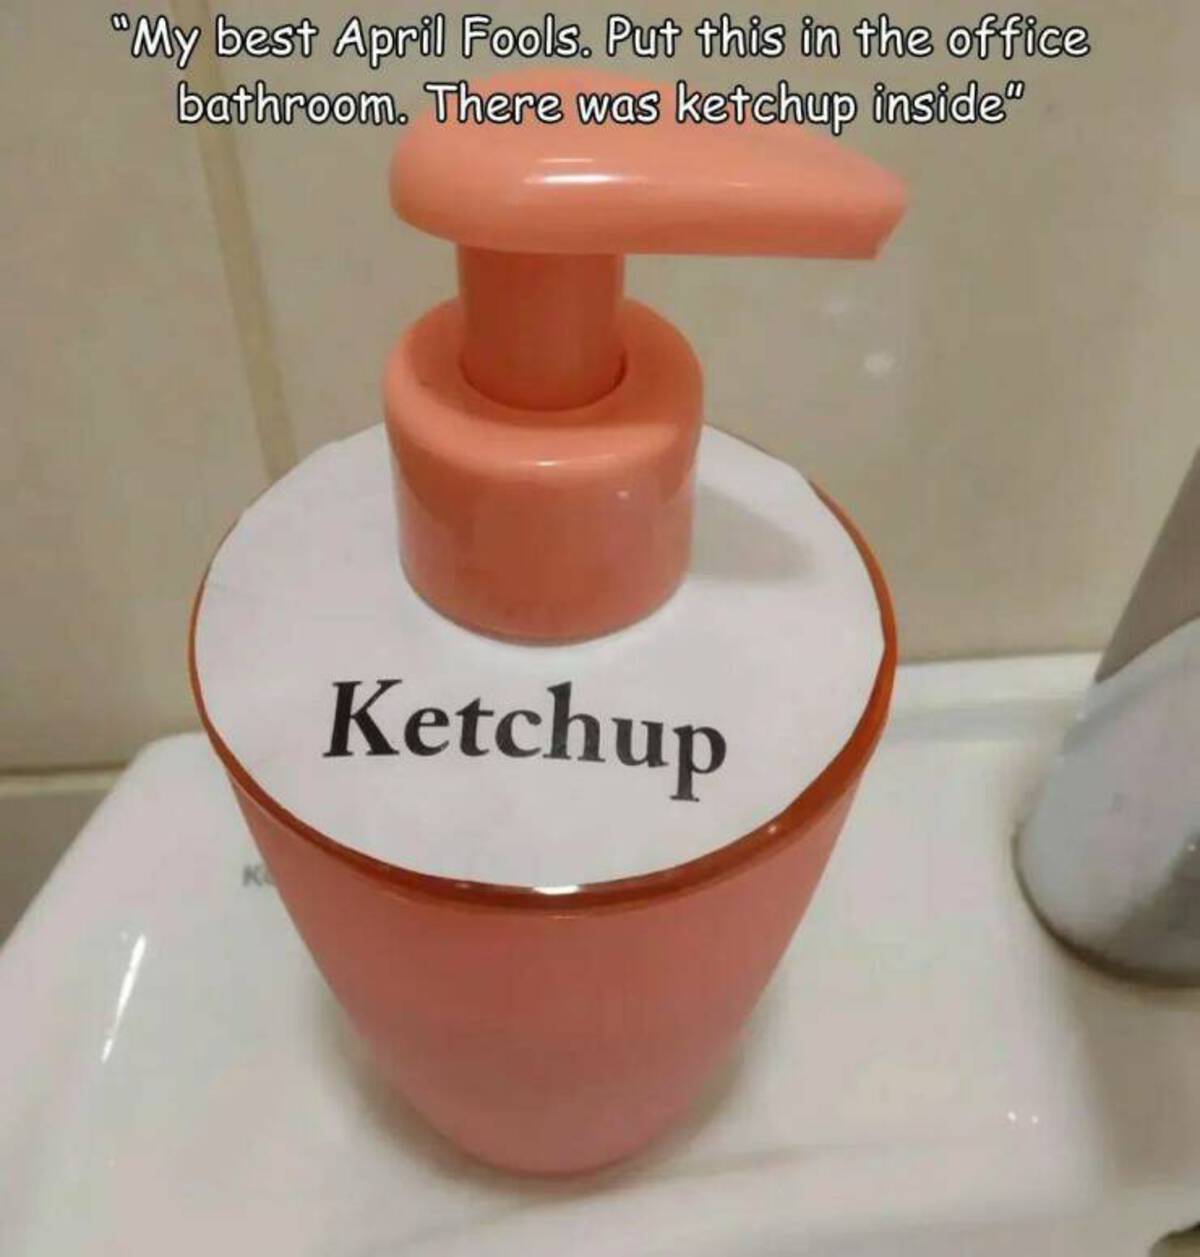 Photograph - "My best April Fools. Put this in the office bathroom. There was ketchup inside" Ketchup